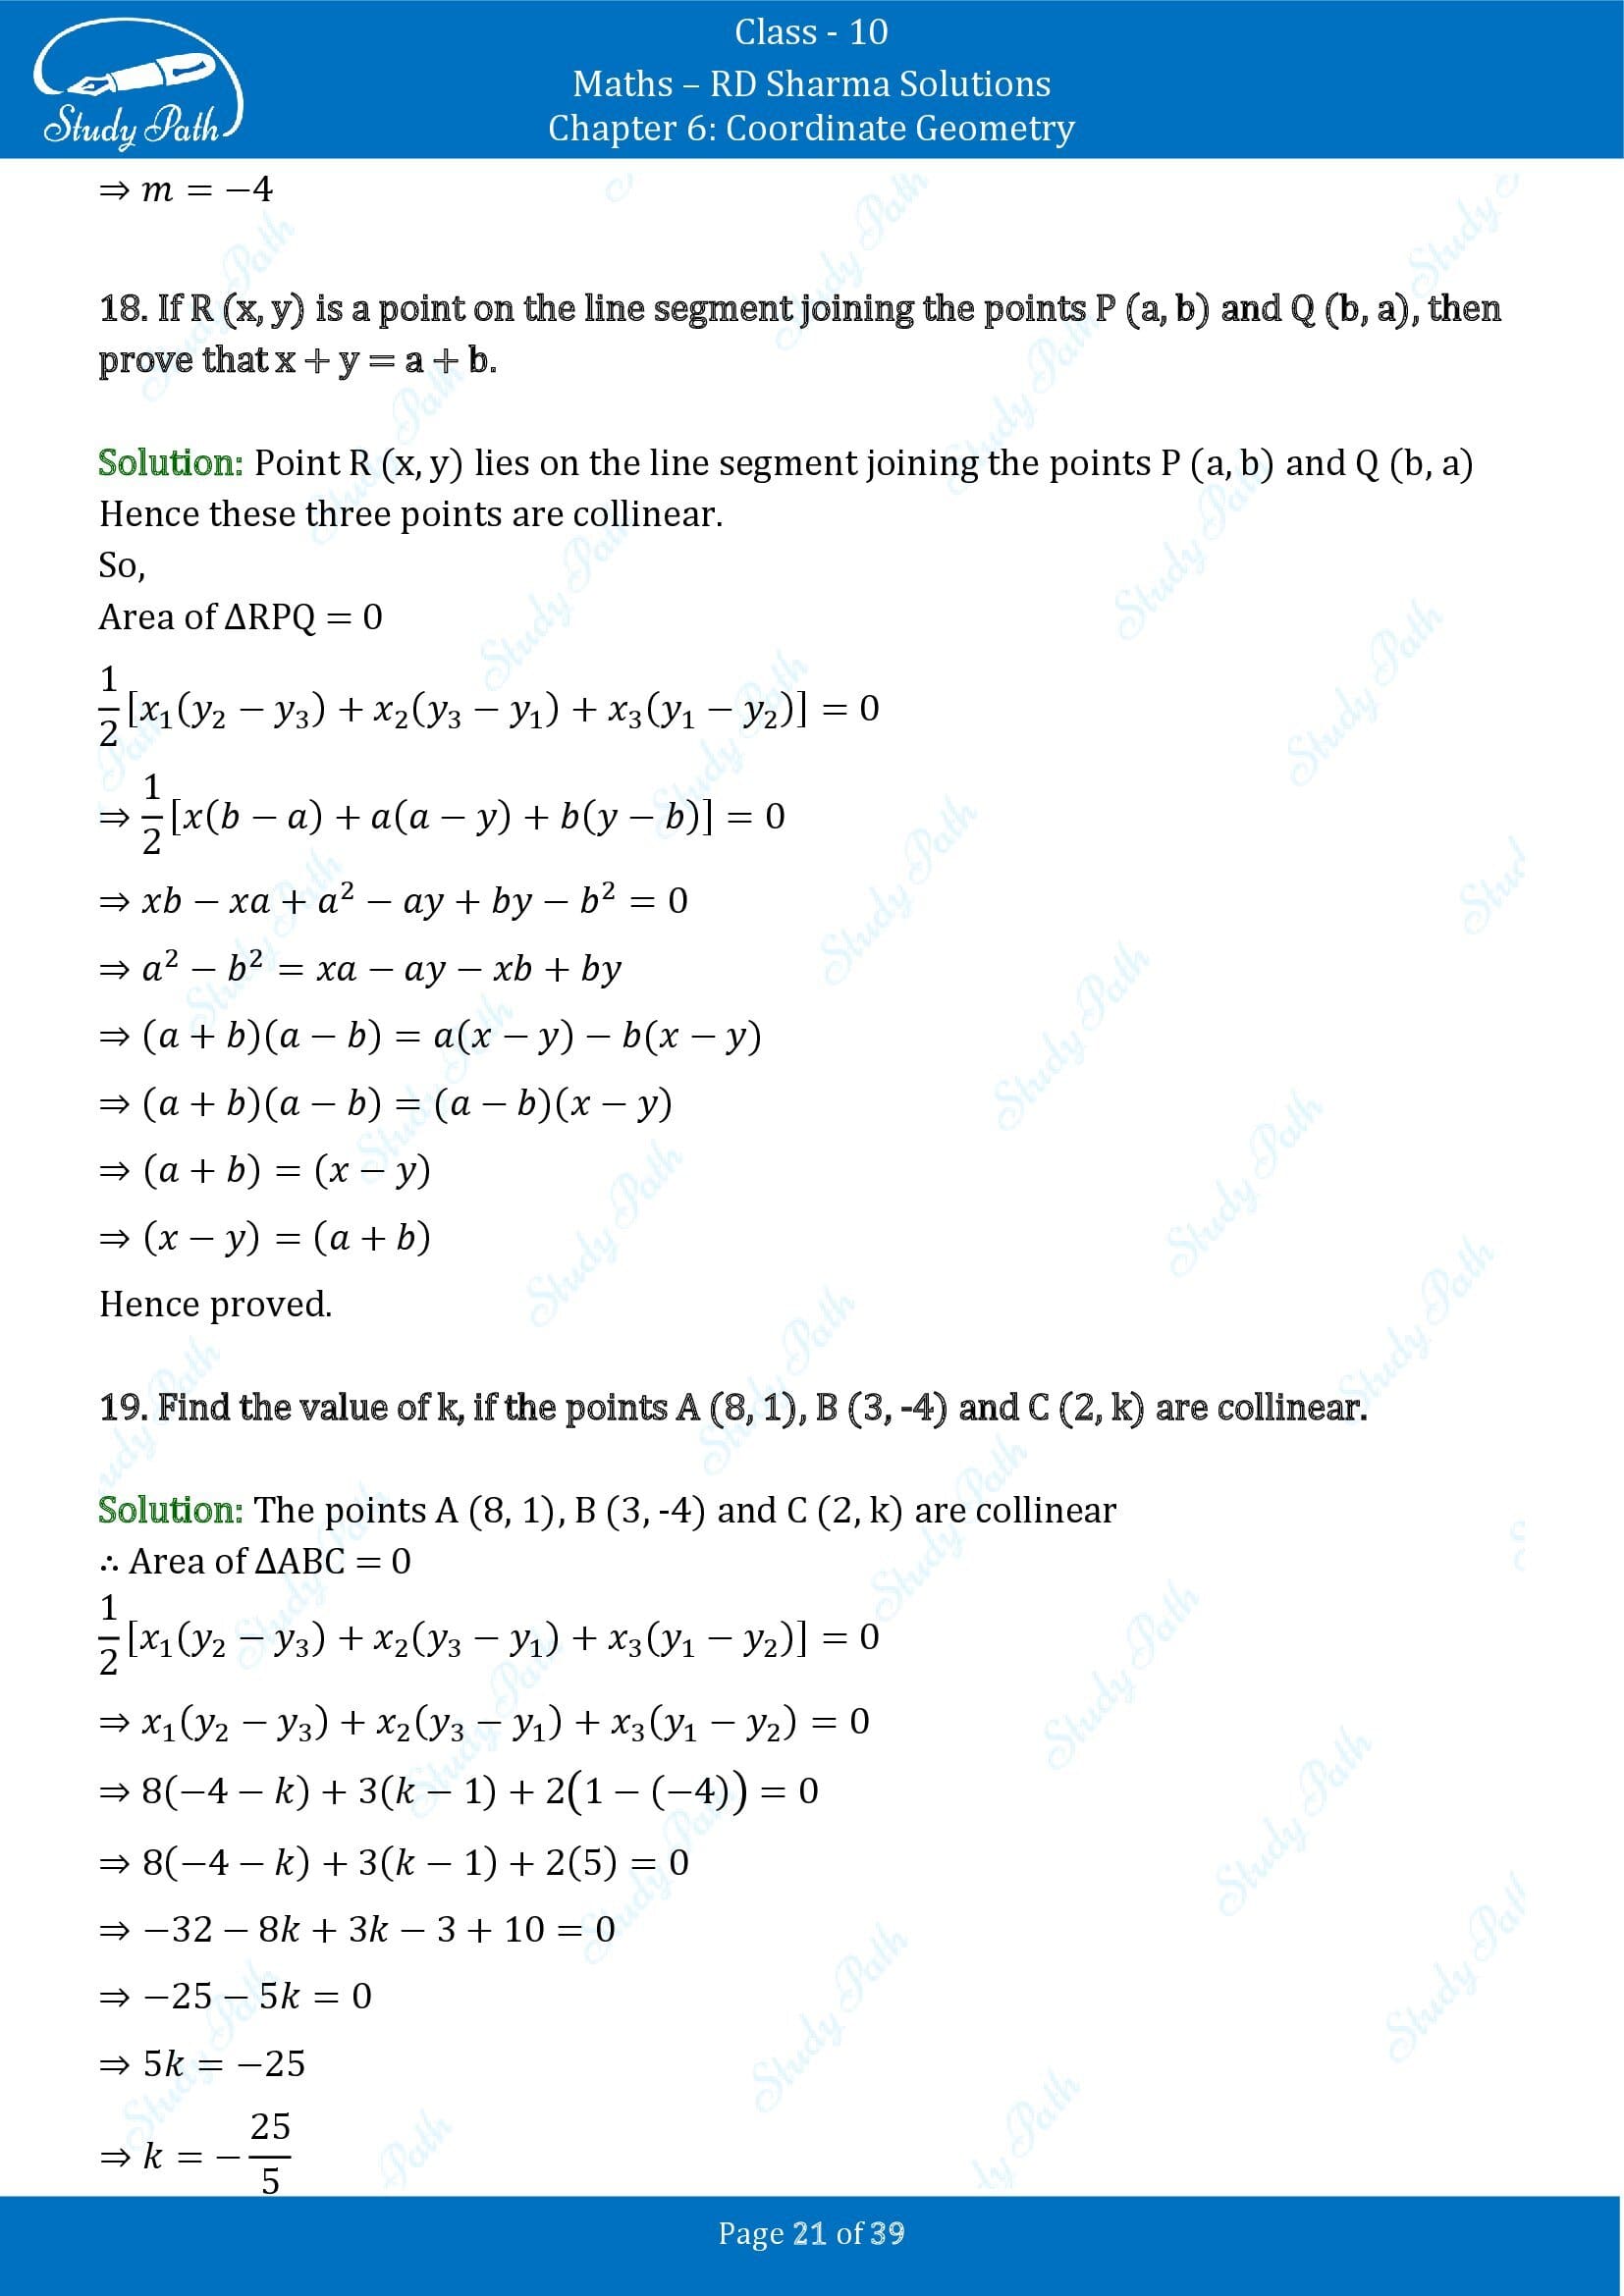 RD Sharma Solutions Class 10 Chapter 6 Coordinate Geometry Exercise 6.5 0021